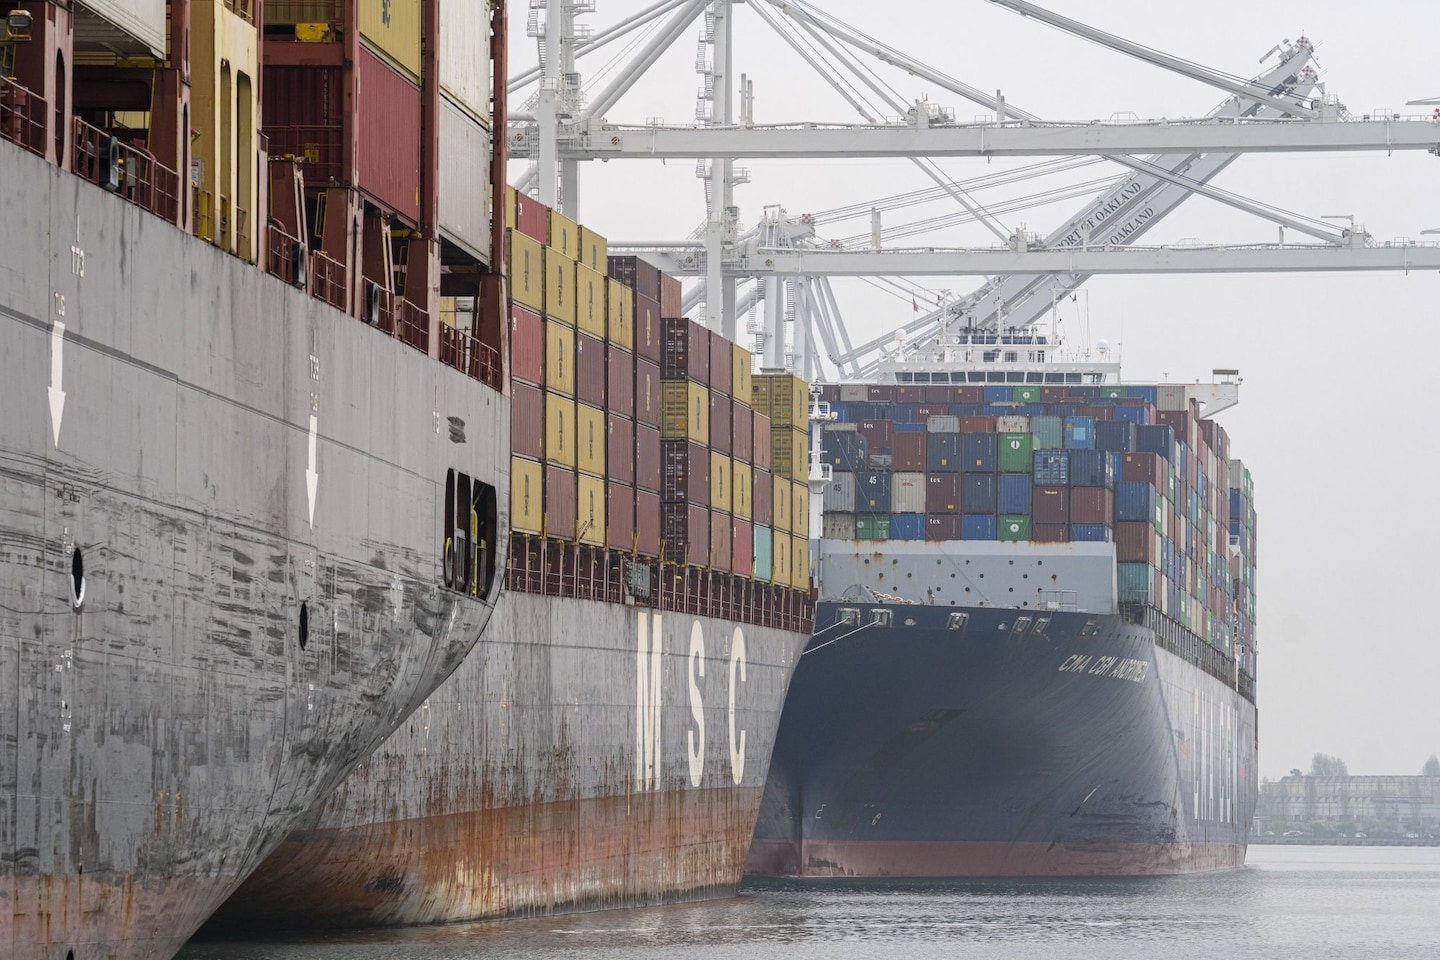 22 countries agreed to establish green shipping routes. That’s big news.